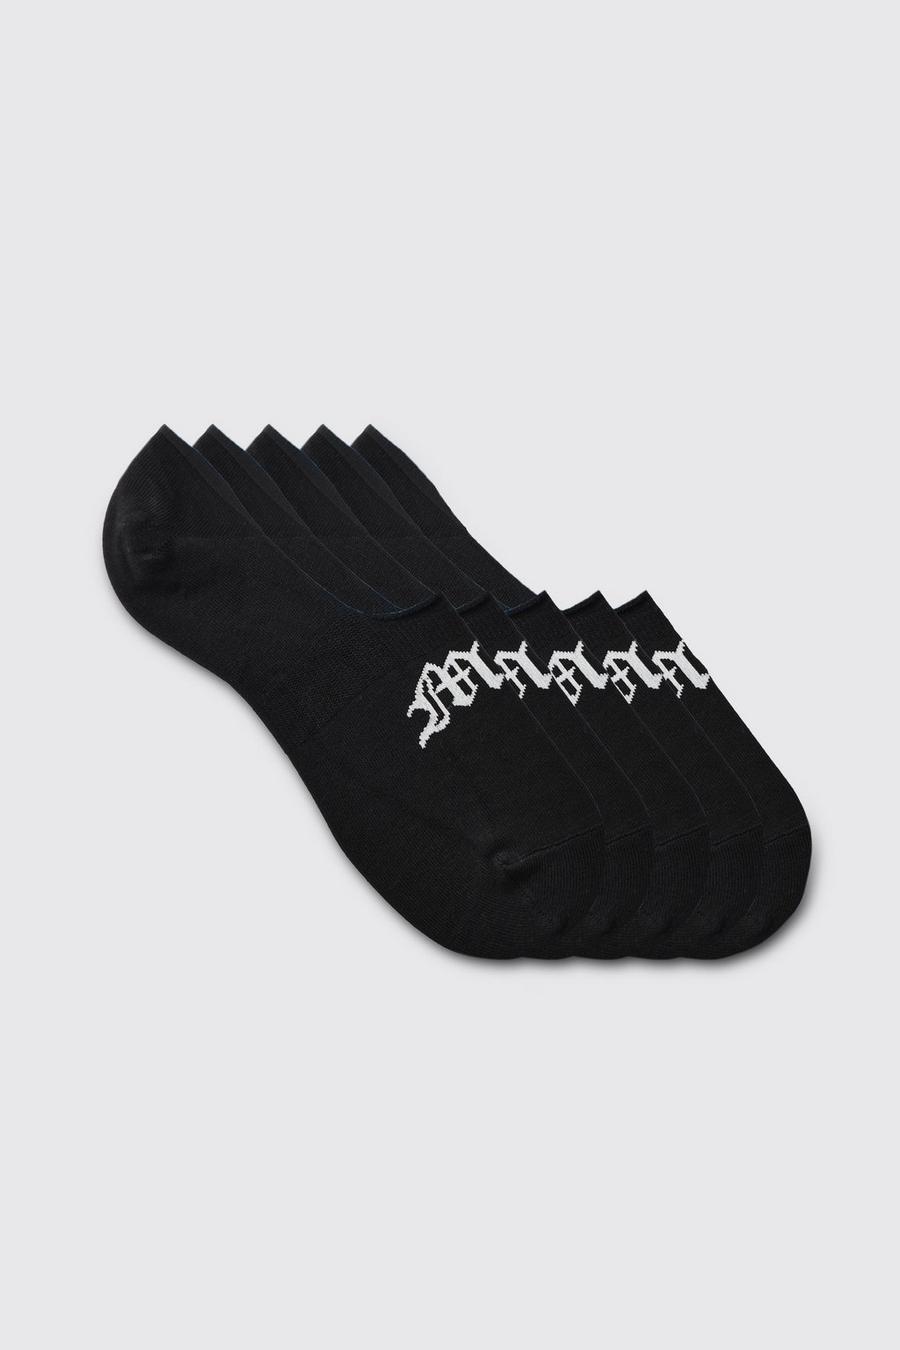 Black 5 Pack Gothic Man Invisible Socks